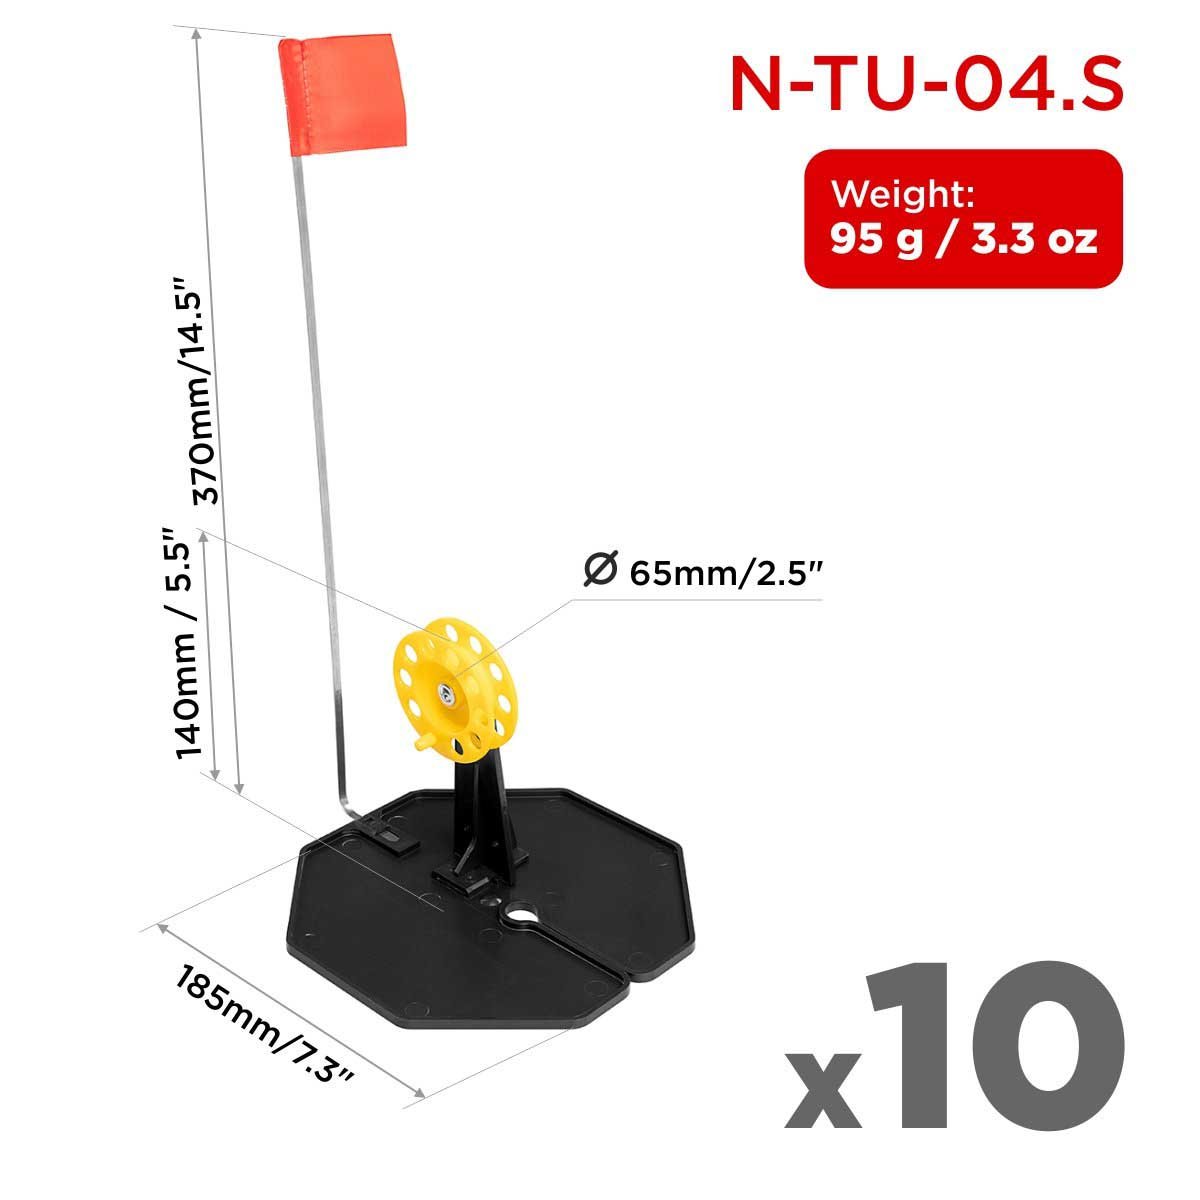 Set of Tip-up Pop-Up Integrated Hole-Cover Easy to Clip N-Tu-04. Each weighs 3.3 oz, the base is 7.3 inches long, the flag shaft is 14.5 inches, the spool diameter is 2.5 inches and its height is 5.5 inches